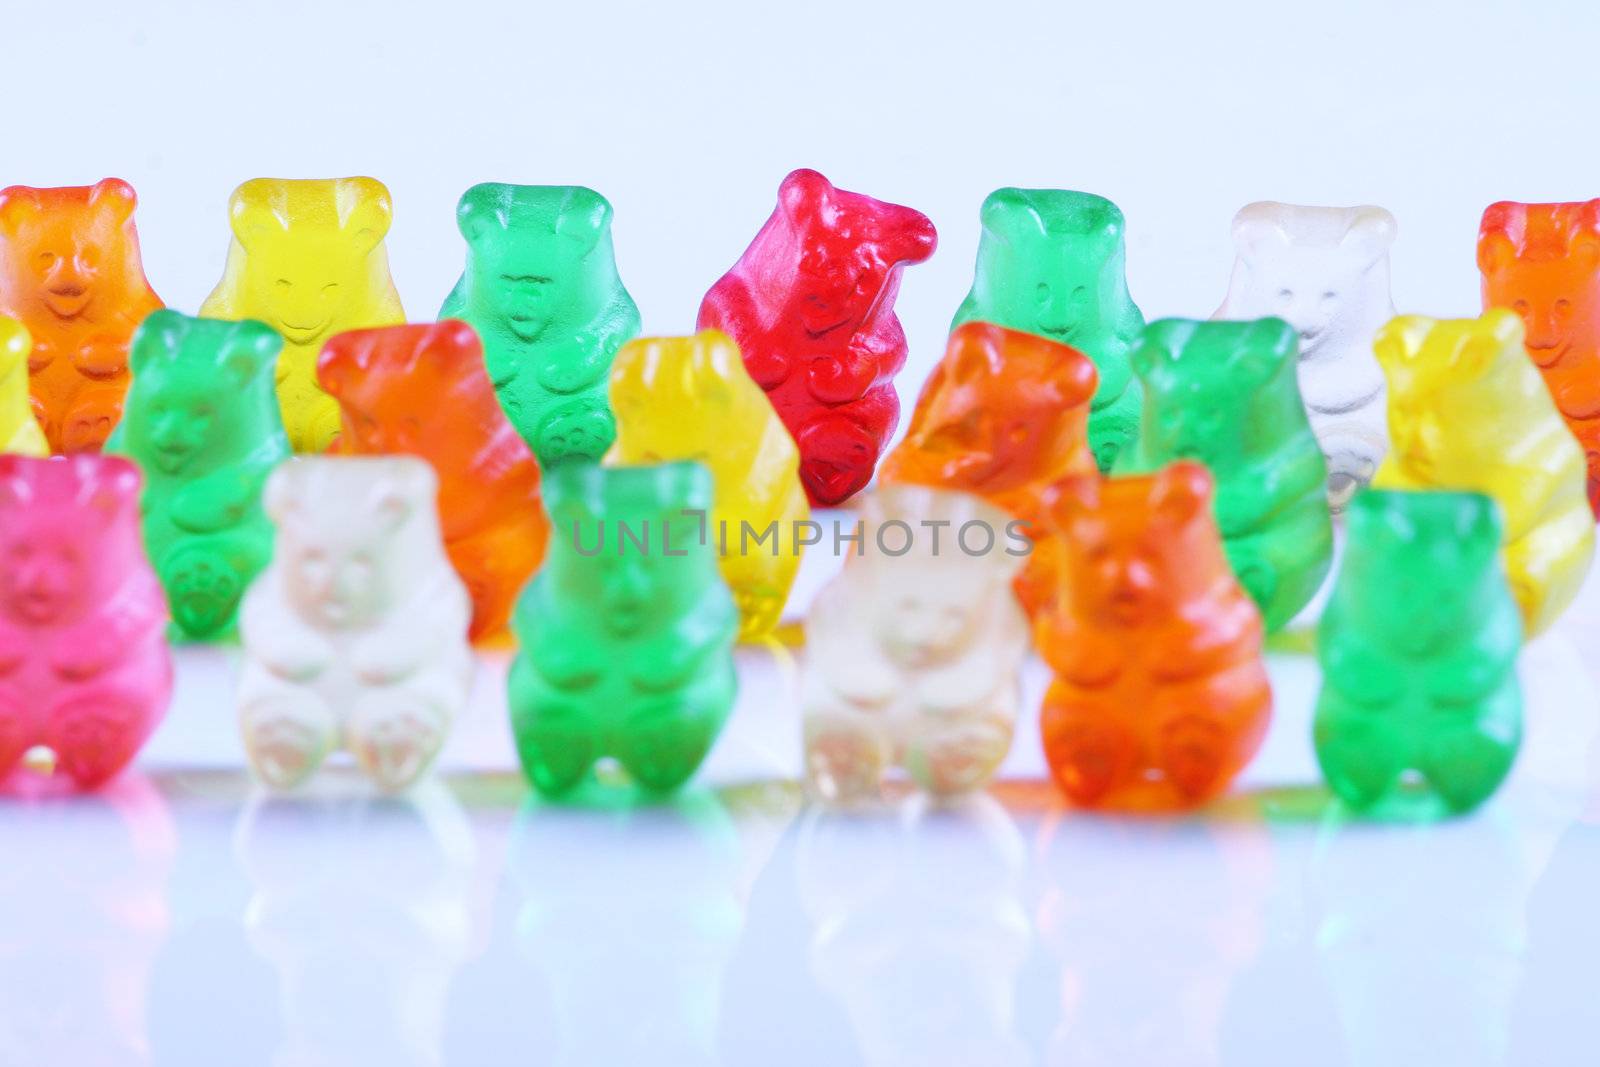 Colorful gummy bears lined up in rows; by jarenwicklund